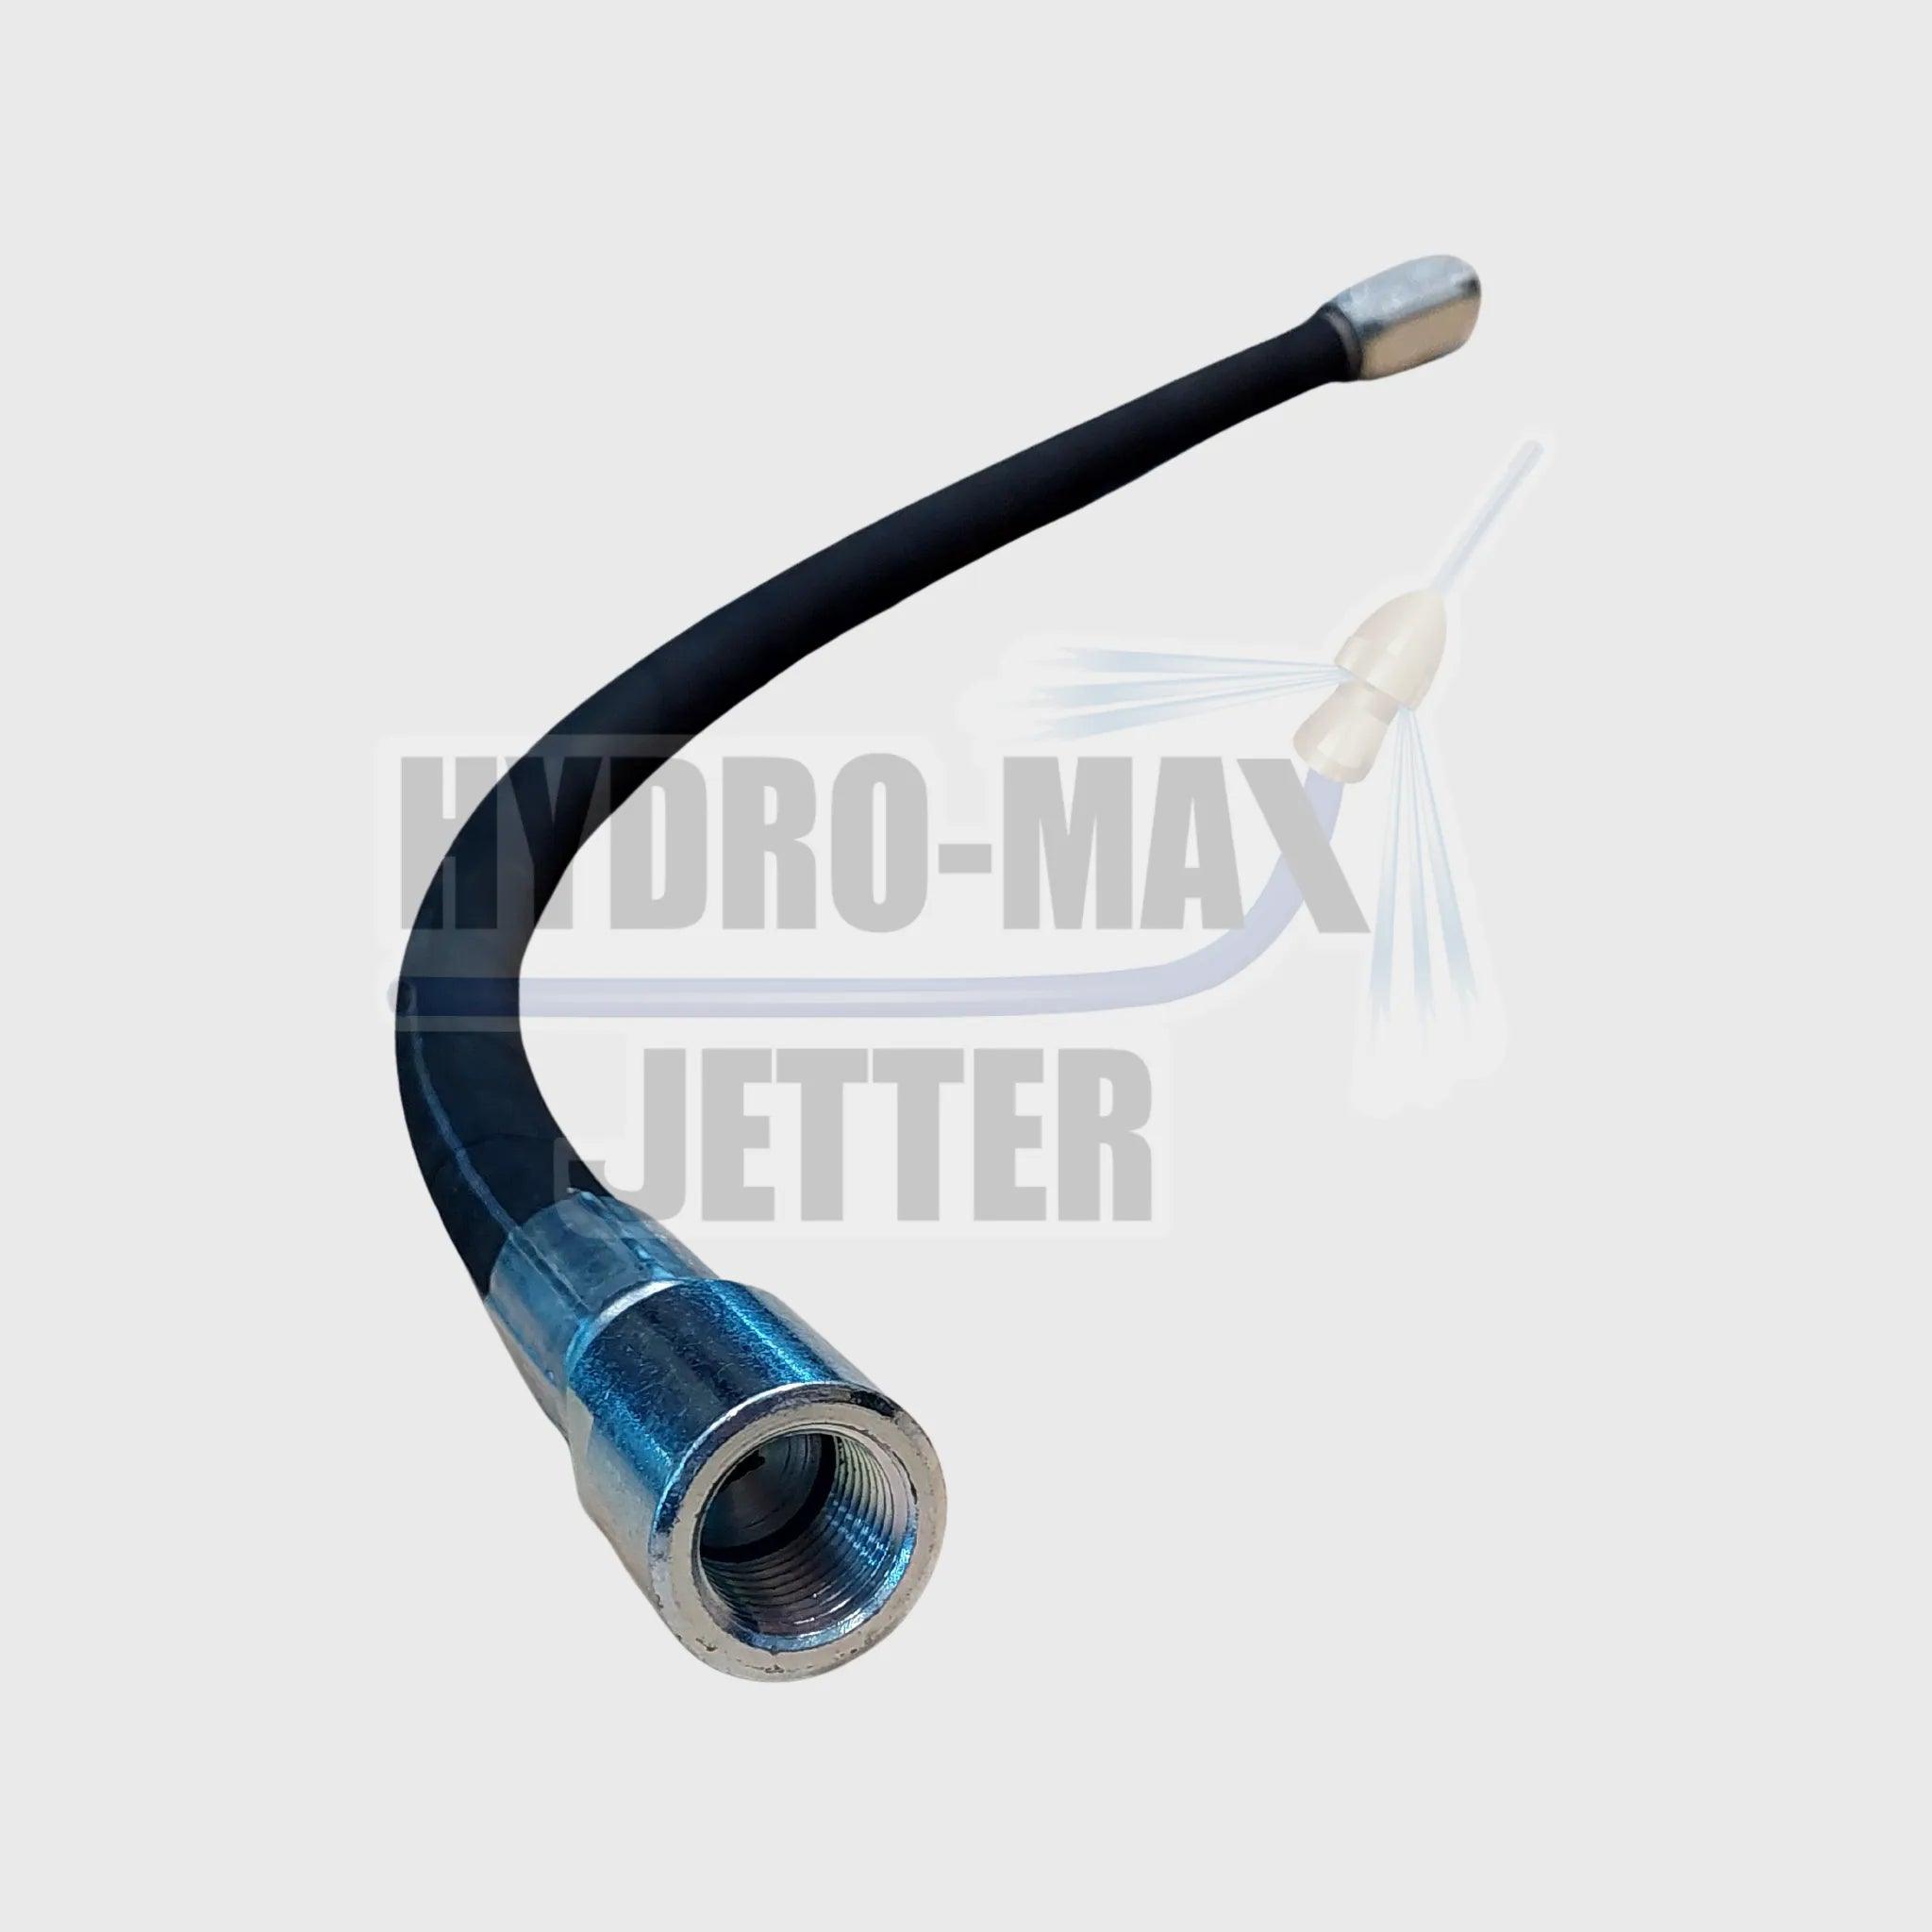 Warthog 1/2" WS Whip Hose - Hydro-Max Jetter